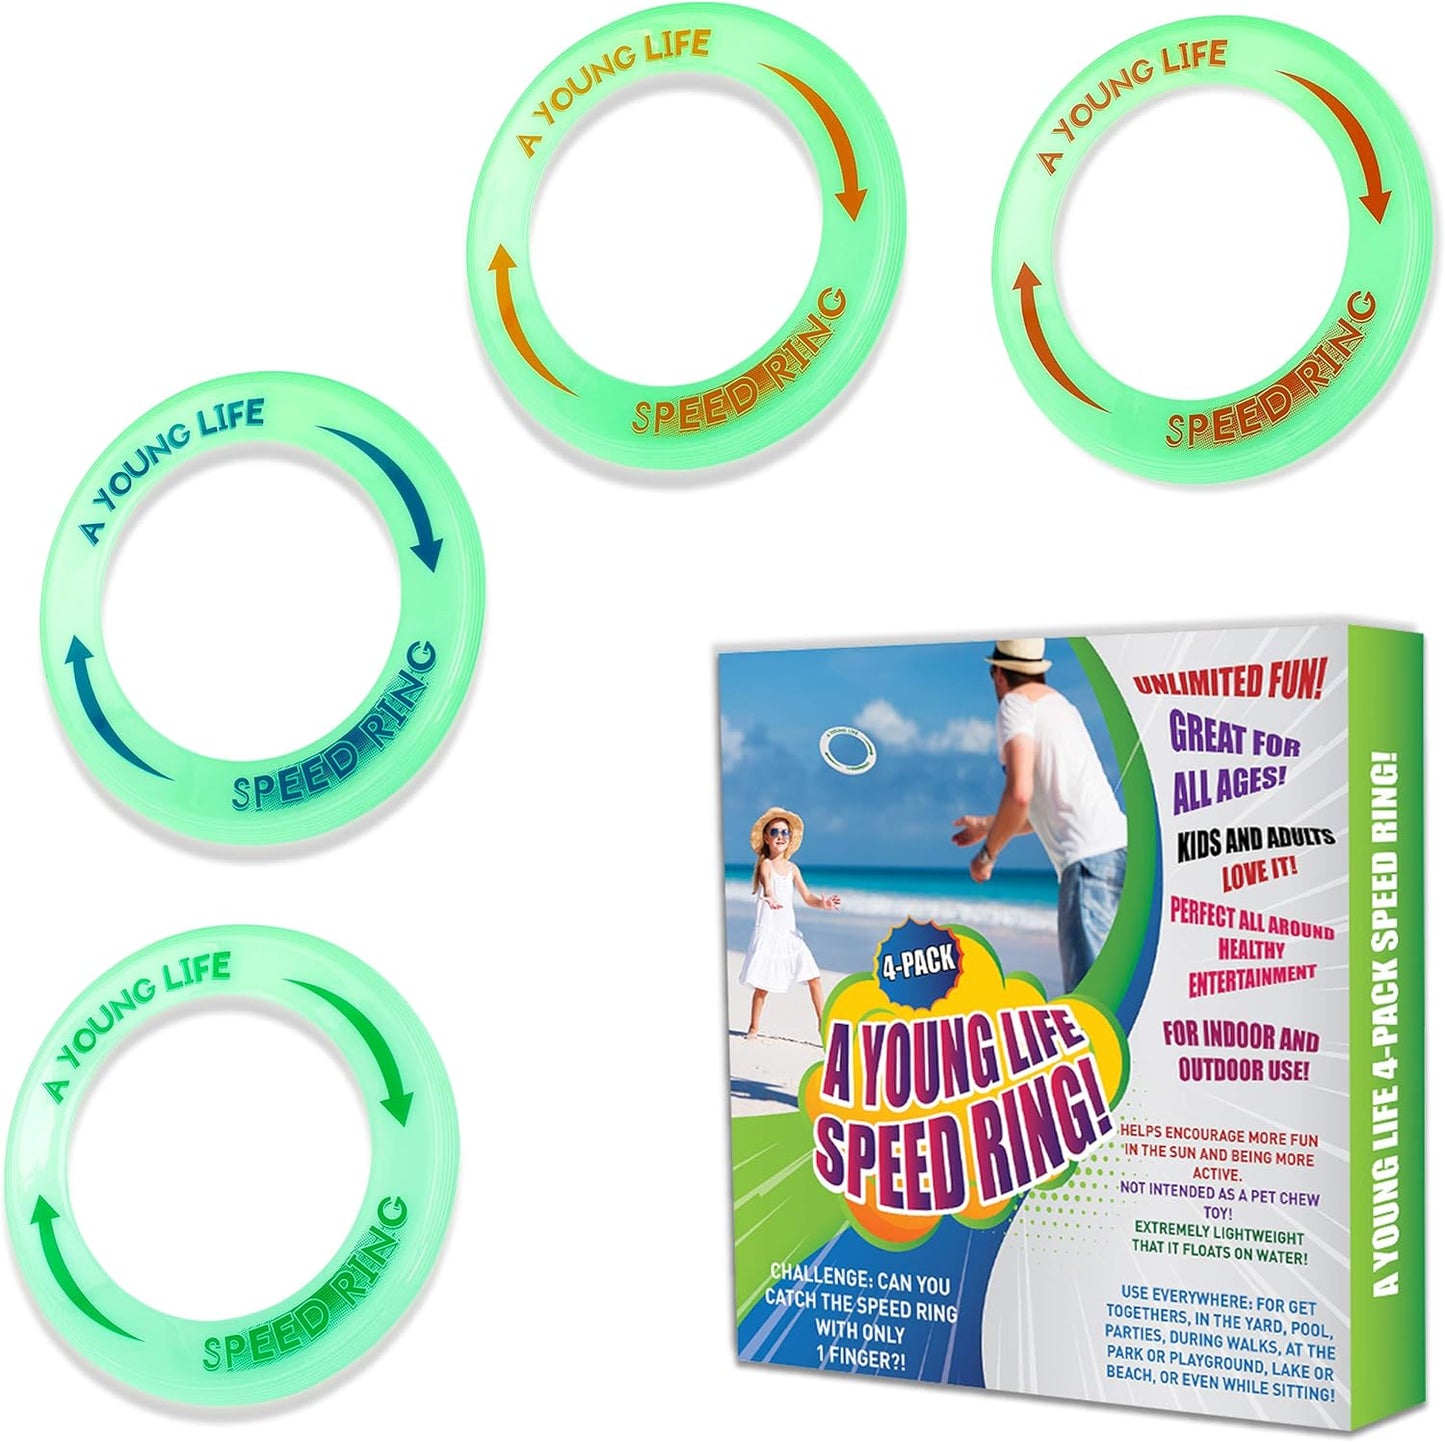 [4 Pack] Kid's Flying Rings Flying Disc - Glow in The Dark - Fly Straight - Weight 1.15 OZ Only - Floats On The Water - Best Healthy Activities for Your Family - Party Outside and Play! - Made in USA